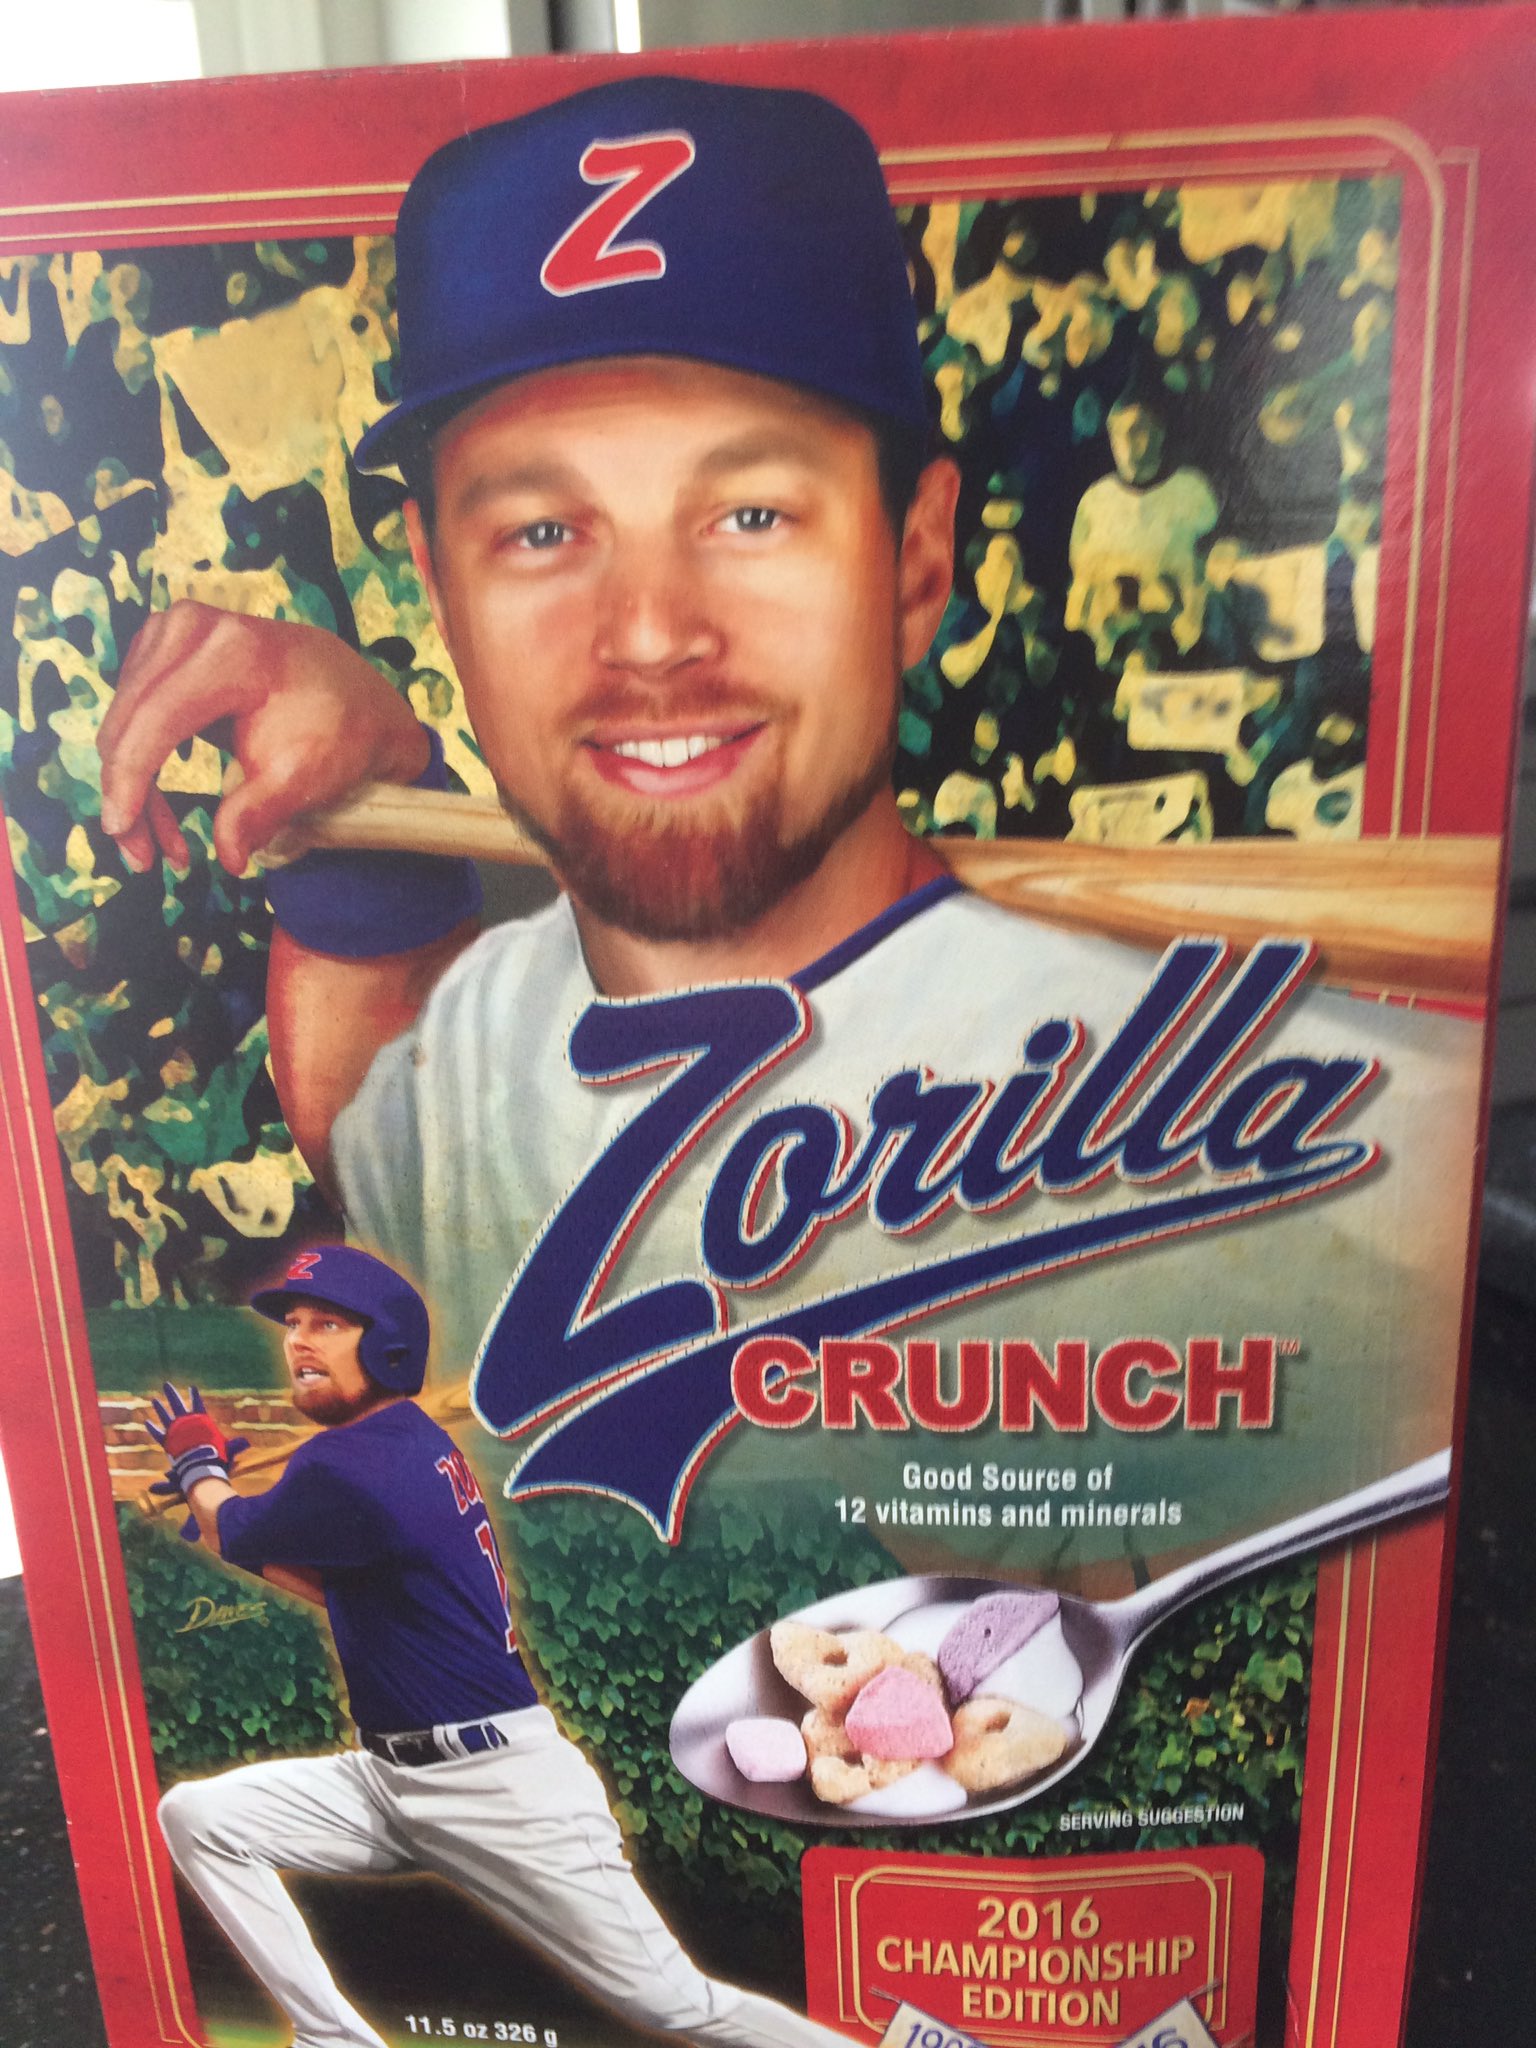 Happy 36th birthday Ben Zobrist!  The Zorilla Crunch cereal box looks a lot like your Eureka High senior photo!! 